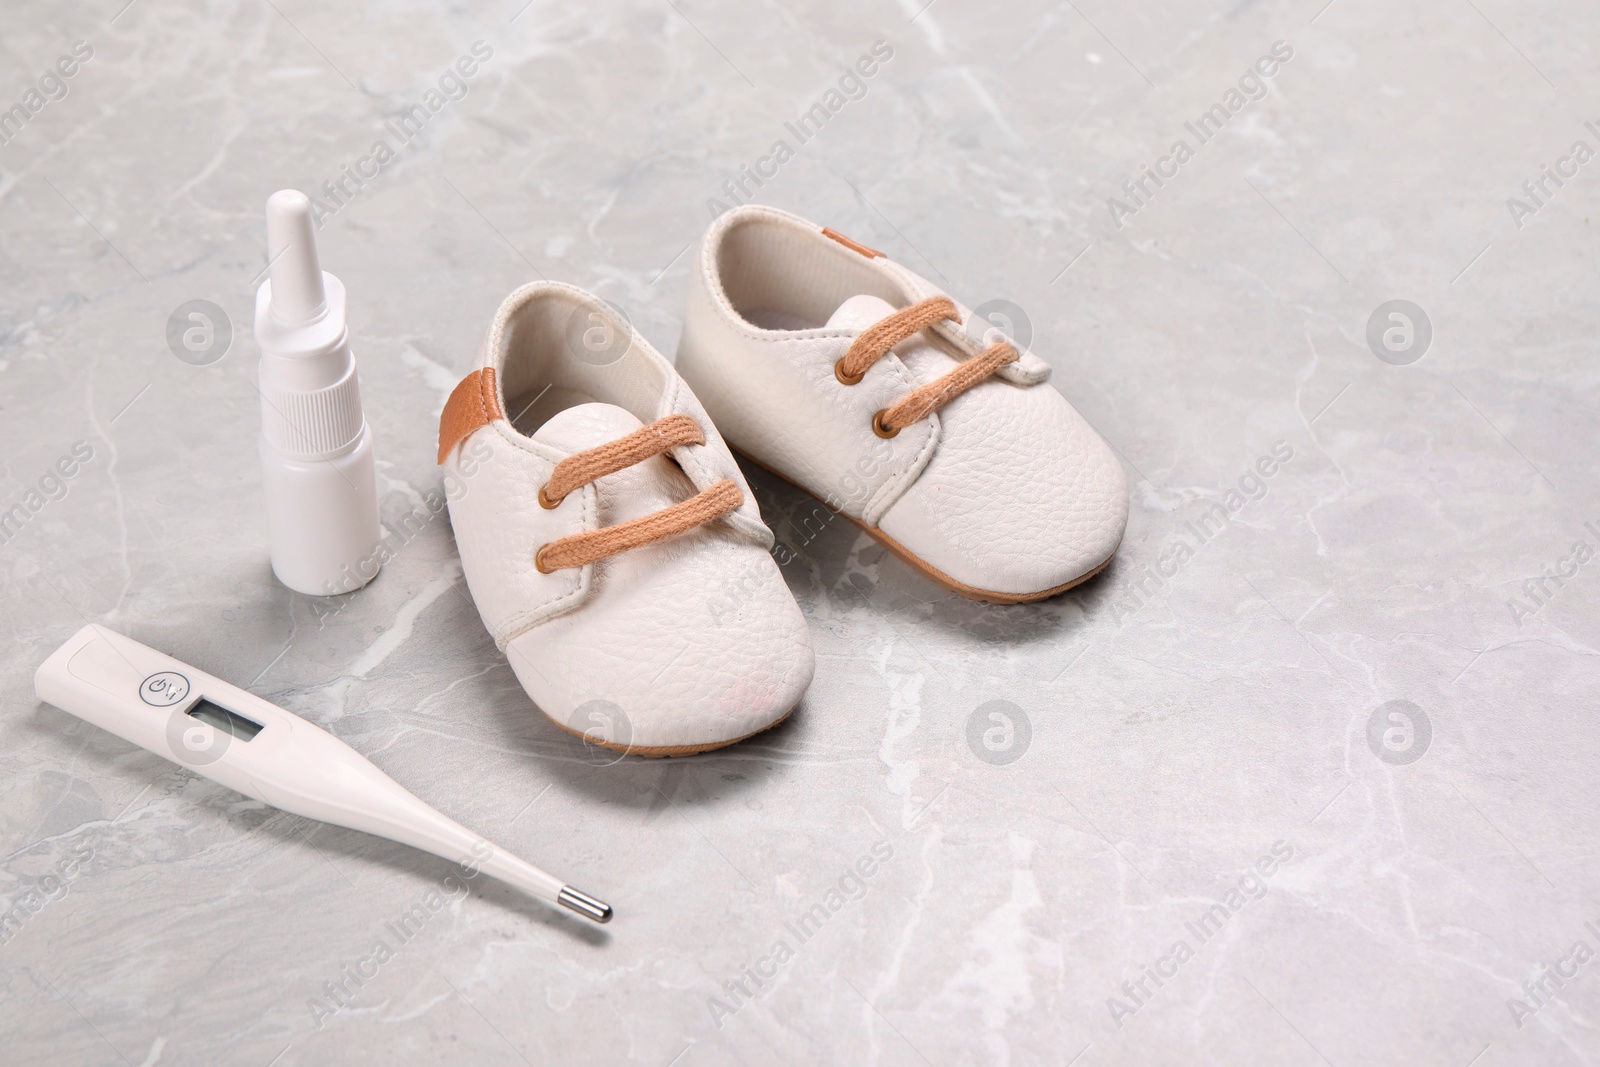 Photo of Kid's shoes, thermometer and nasal spray on gray marble background